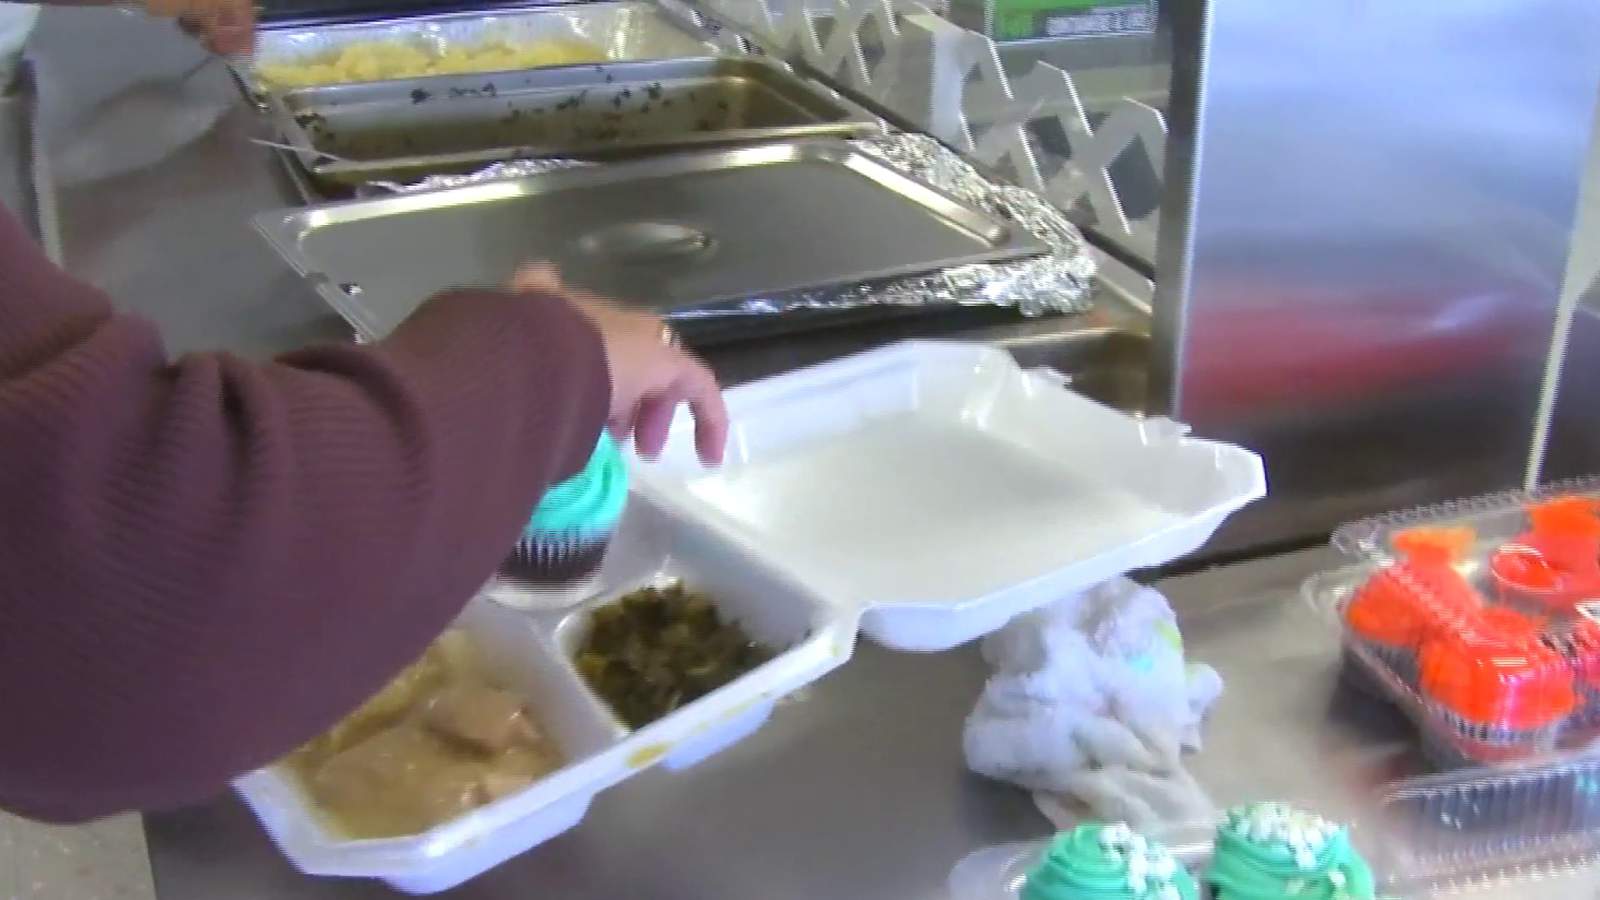 During difficult times, local charity opens doors to continue feeding those in need